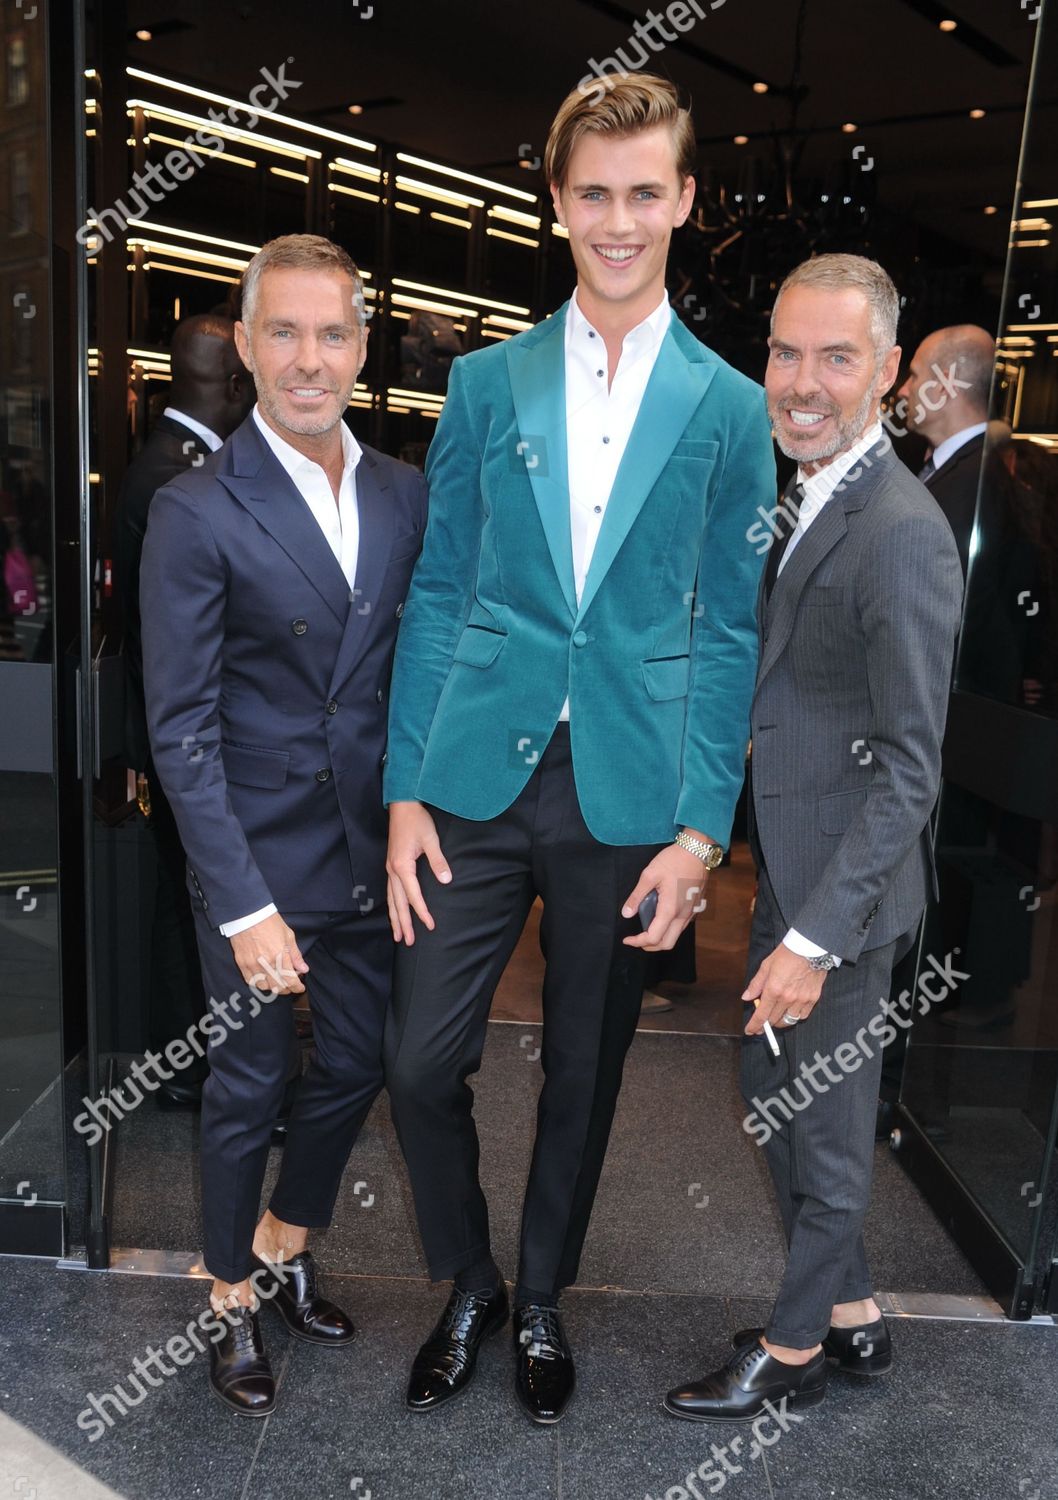 dsquared-vip-cocktail-party-london-uk-shutterstock-editorial-5770211a.jpg